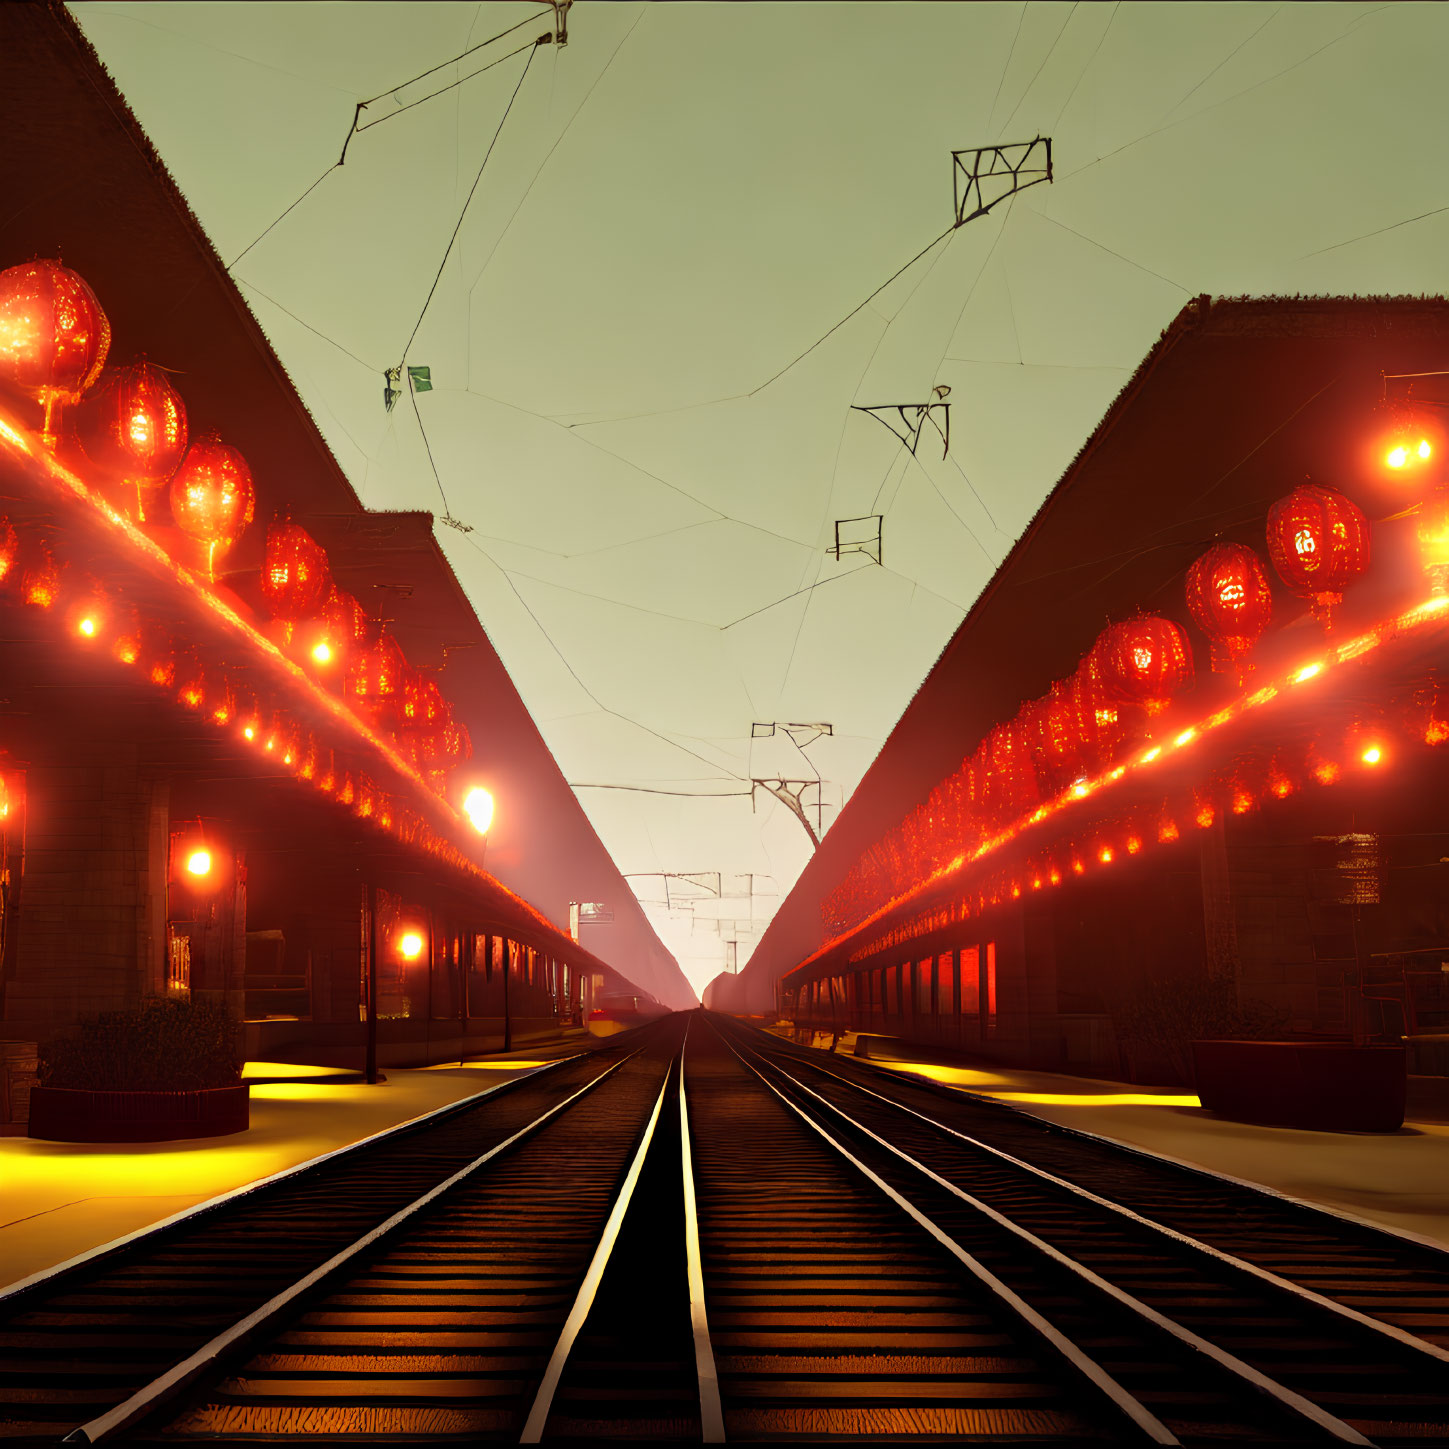 Surreal train station at dusk with glowing red orb lights and orange sky